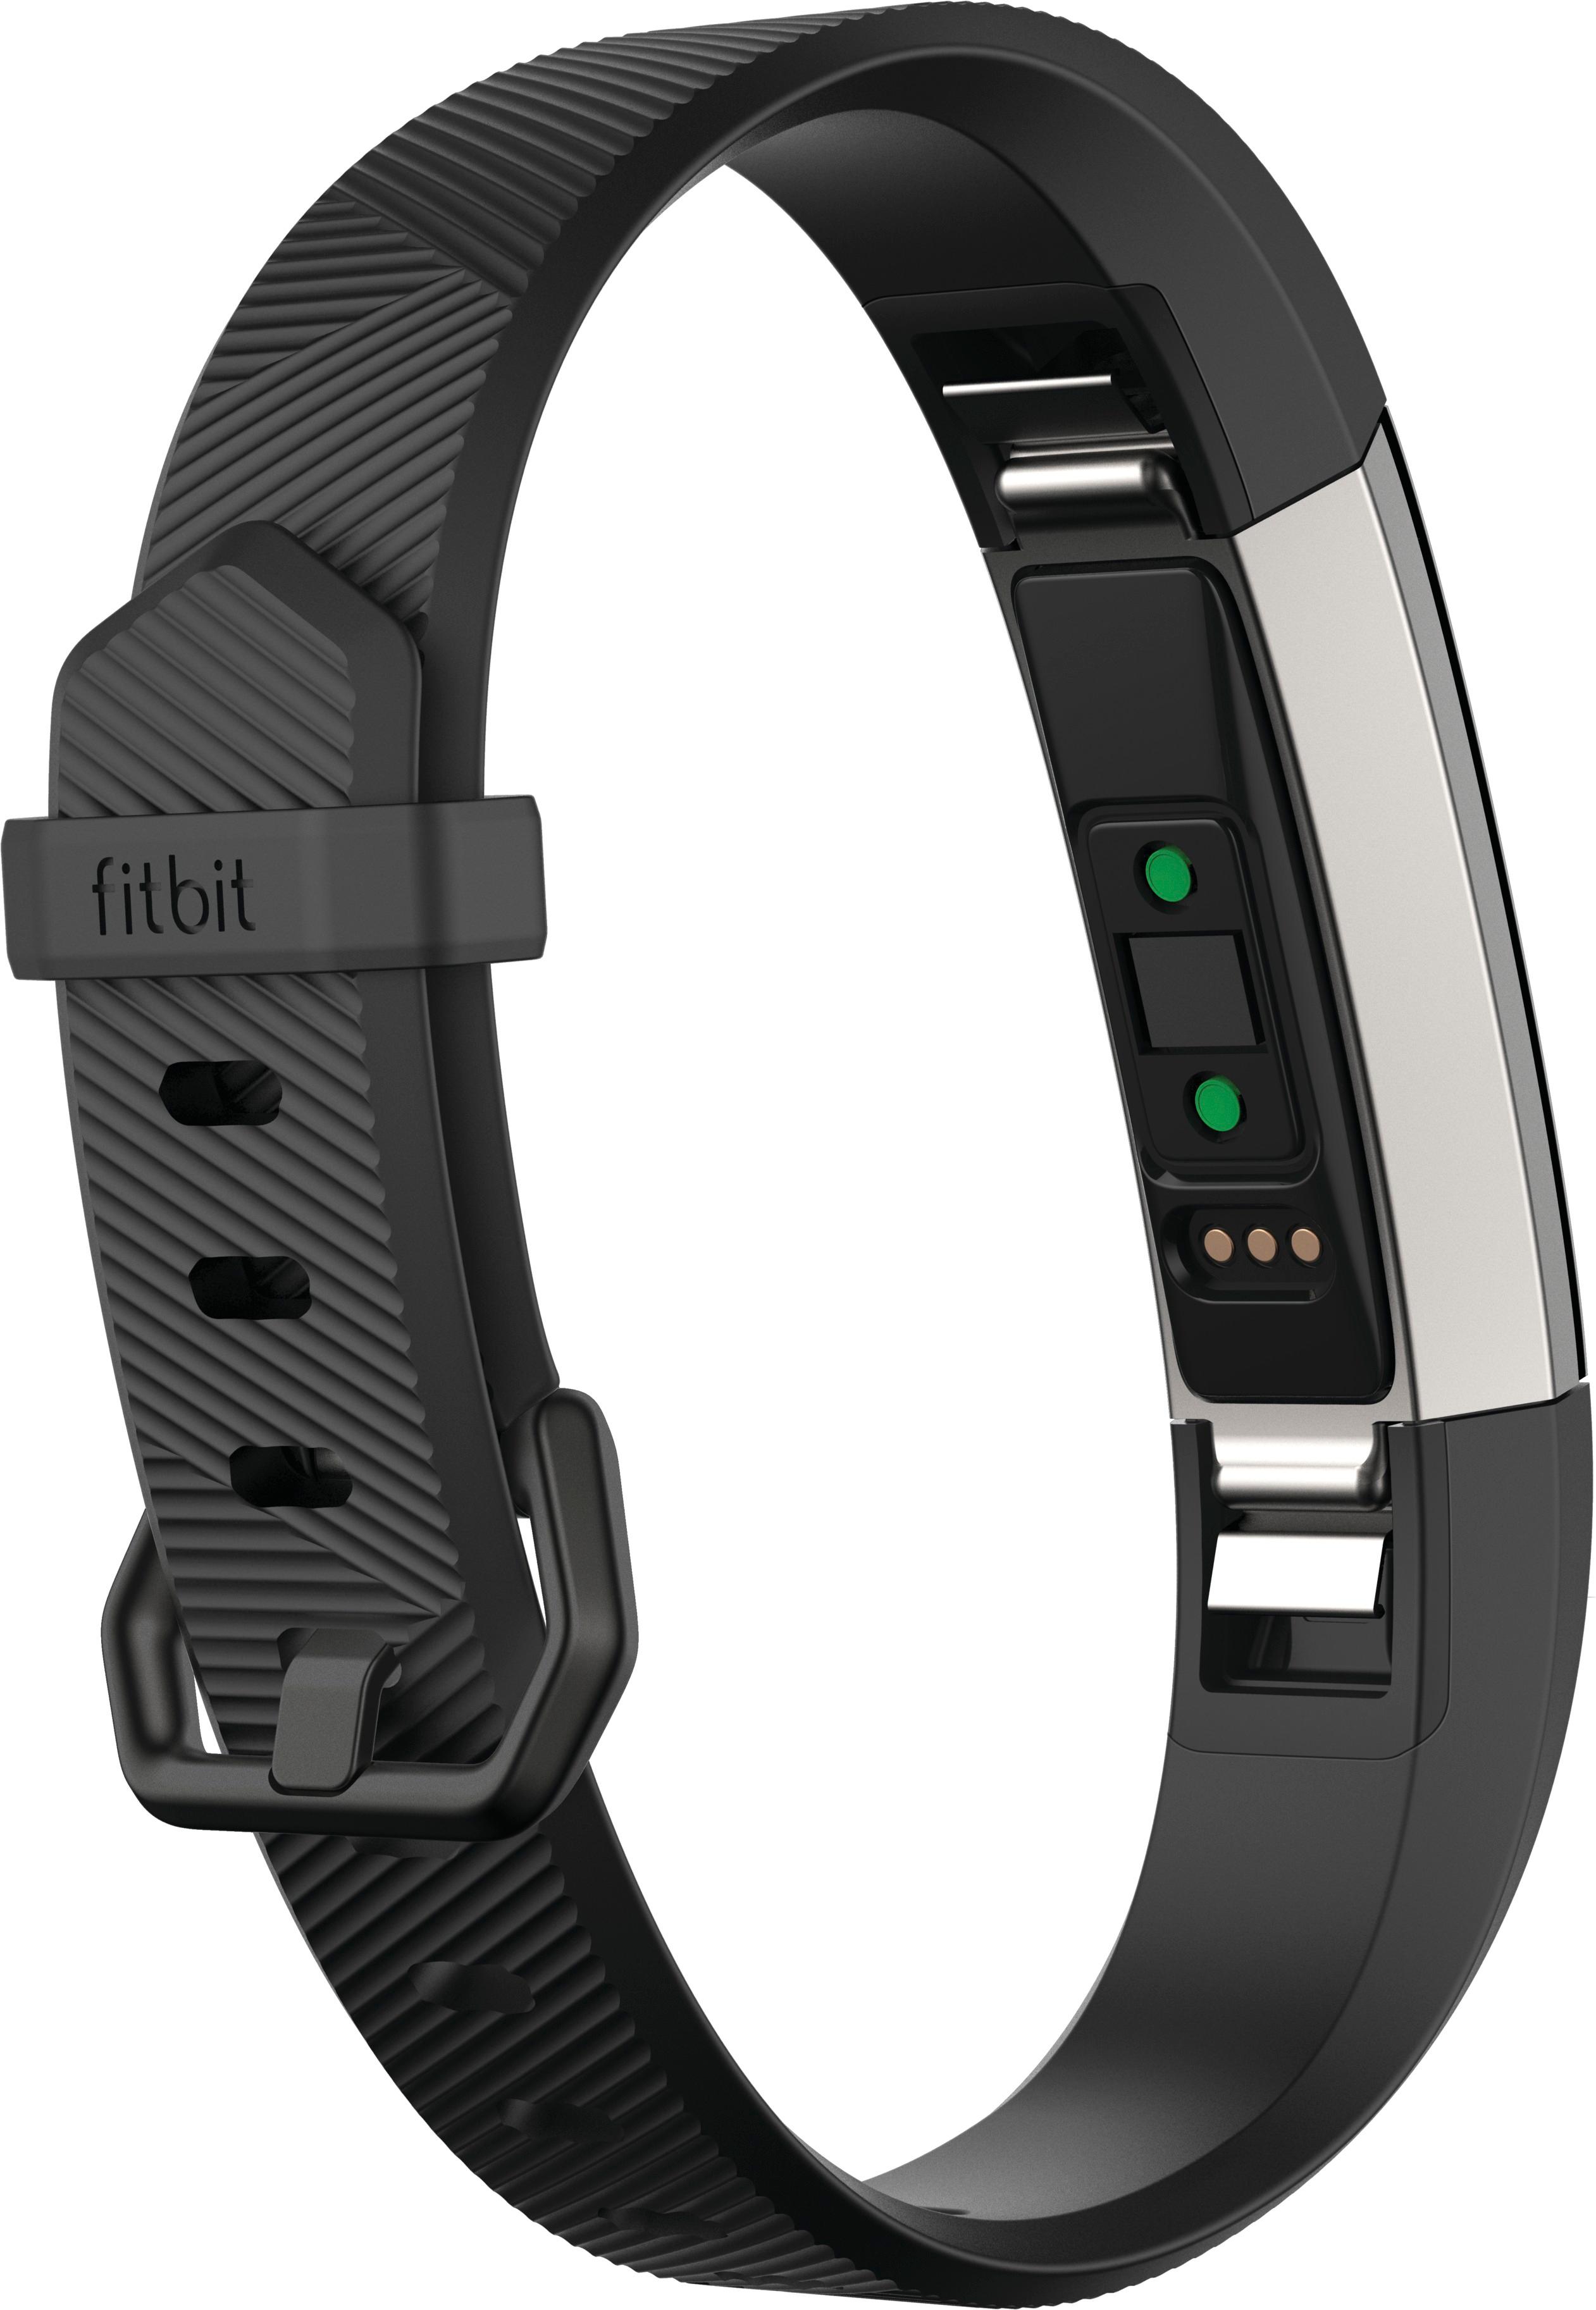 Black for sale online Fitbit Alta Small Activity Tracker 